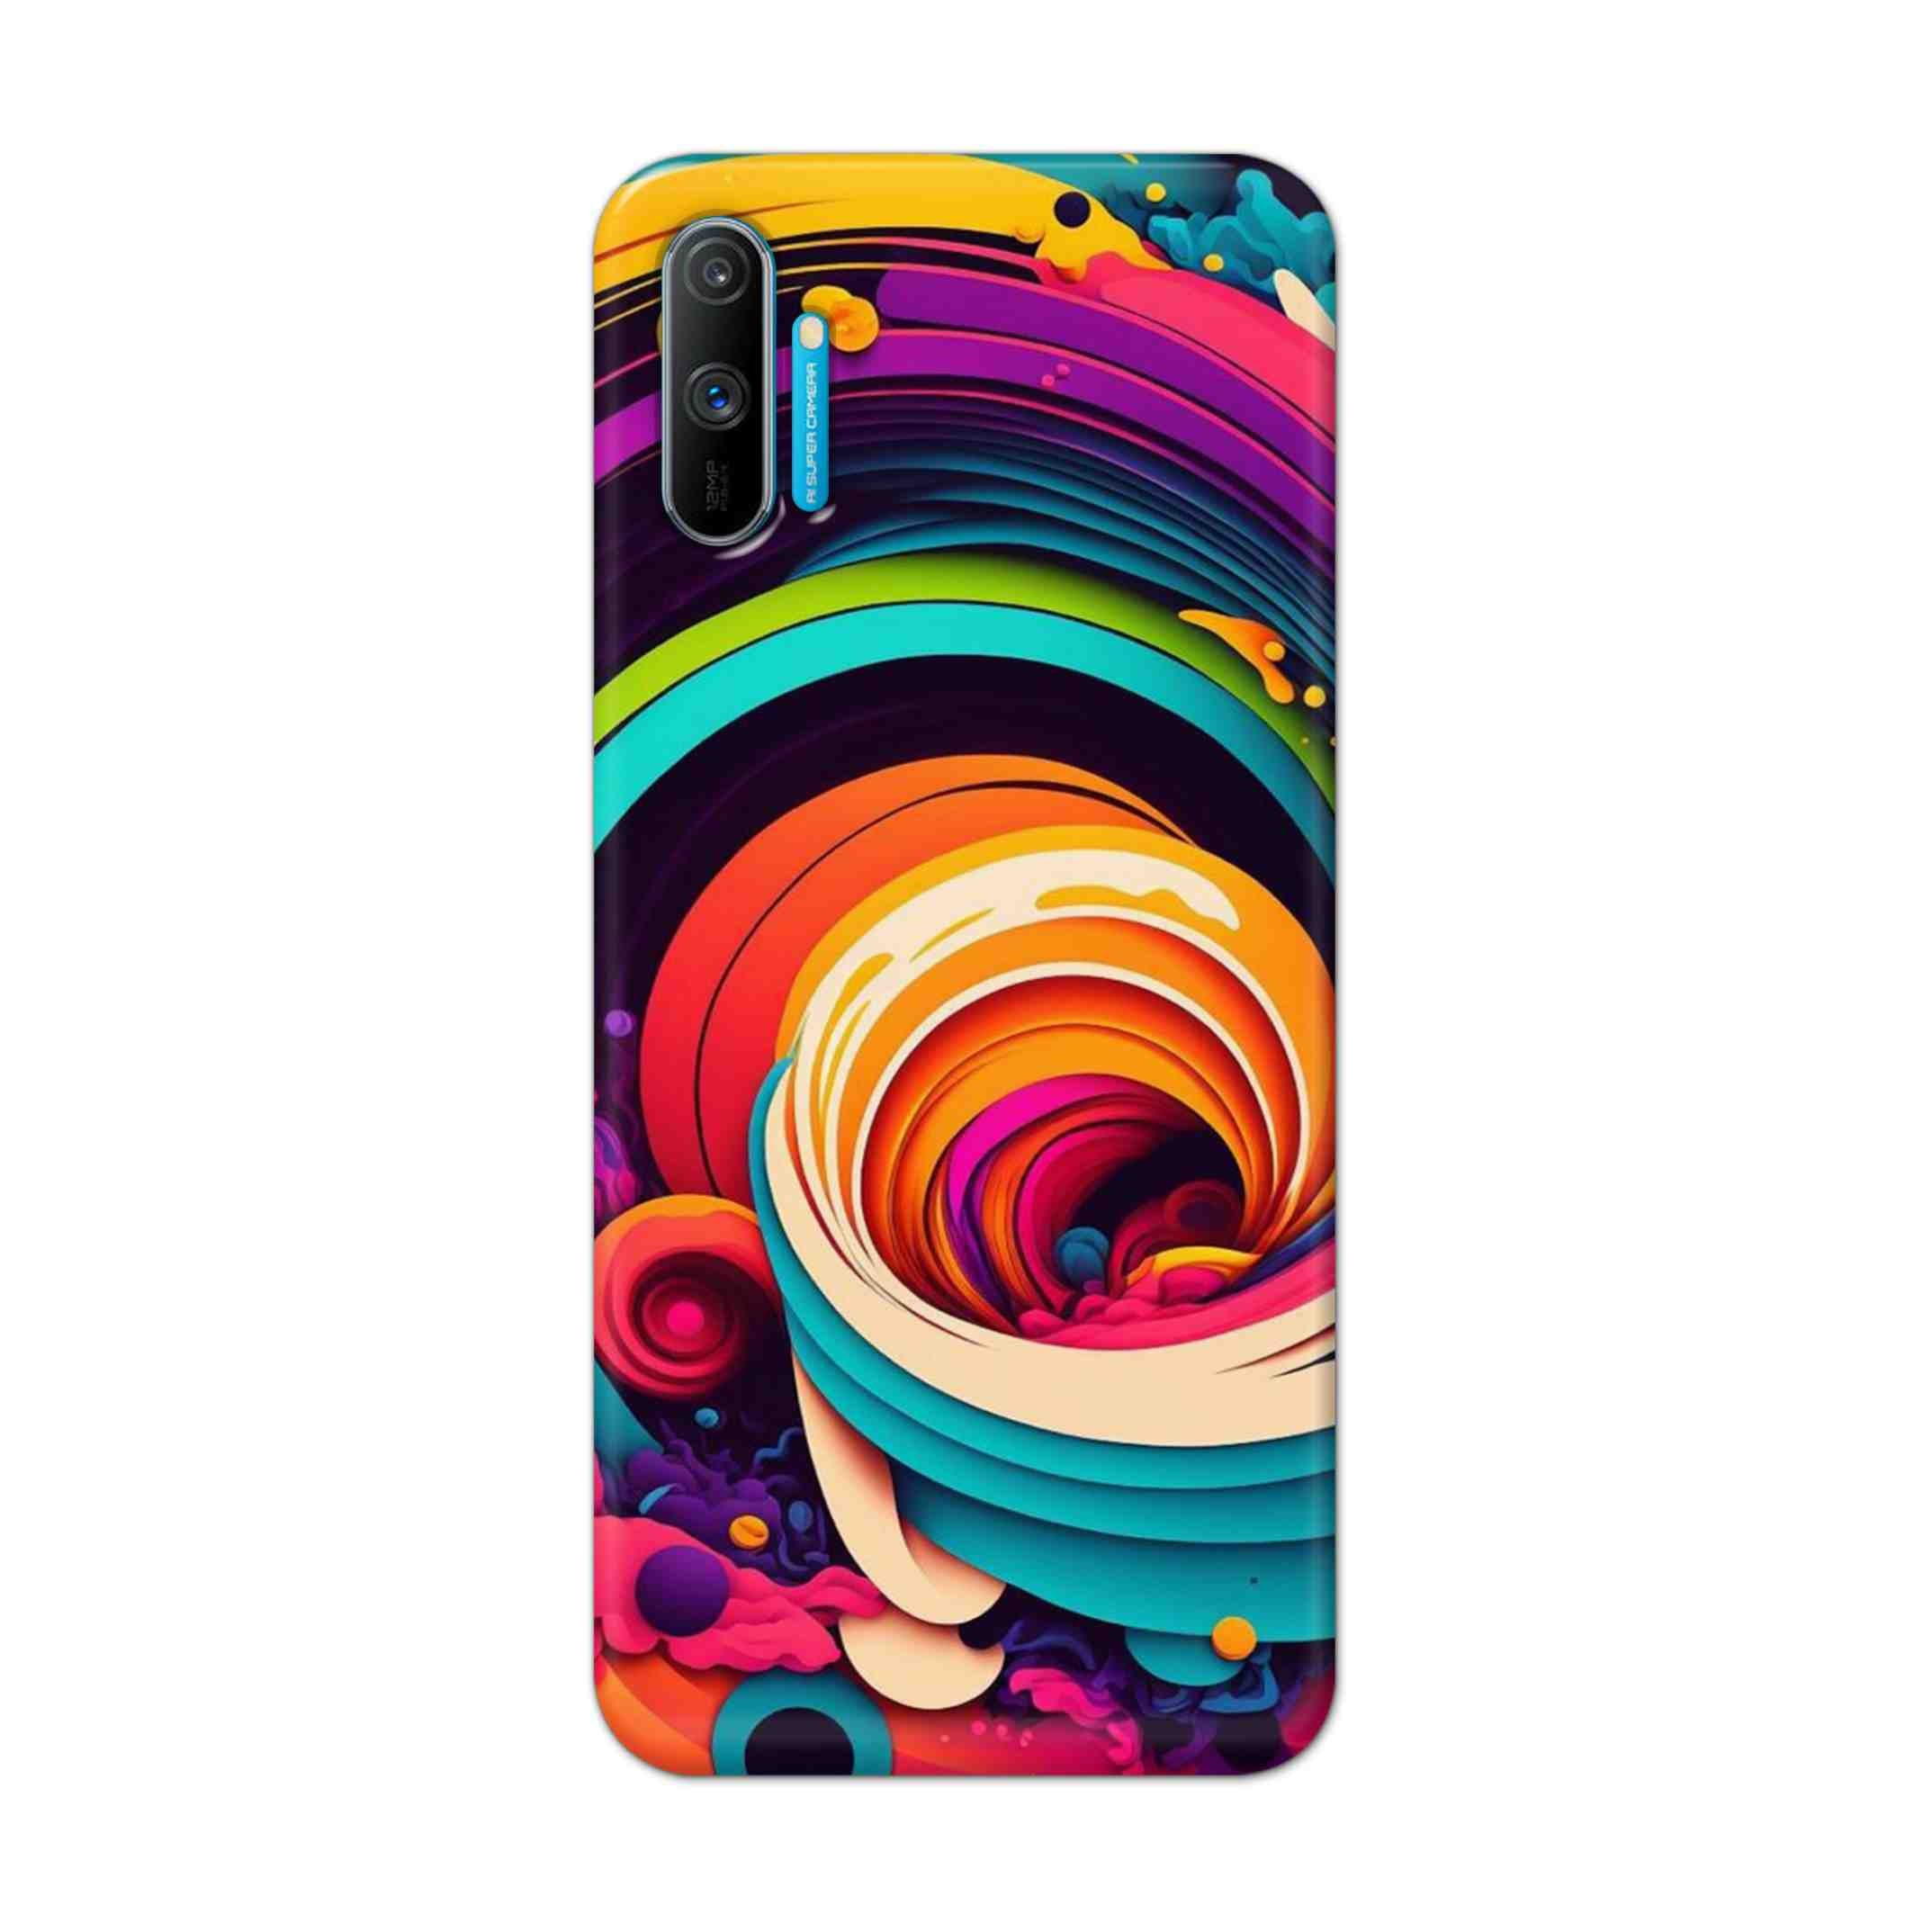 Buy Colour Circle Hard Back Mobile Phone Case Cover For Realme C3 Online